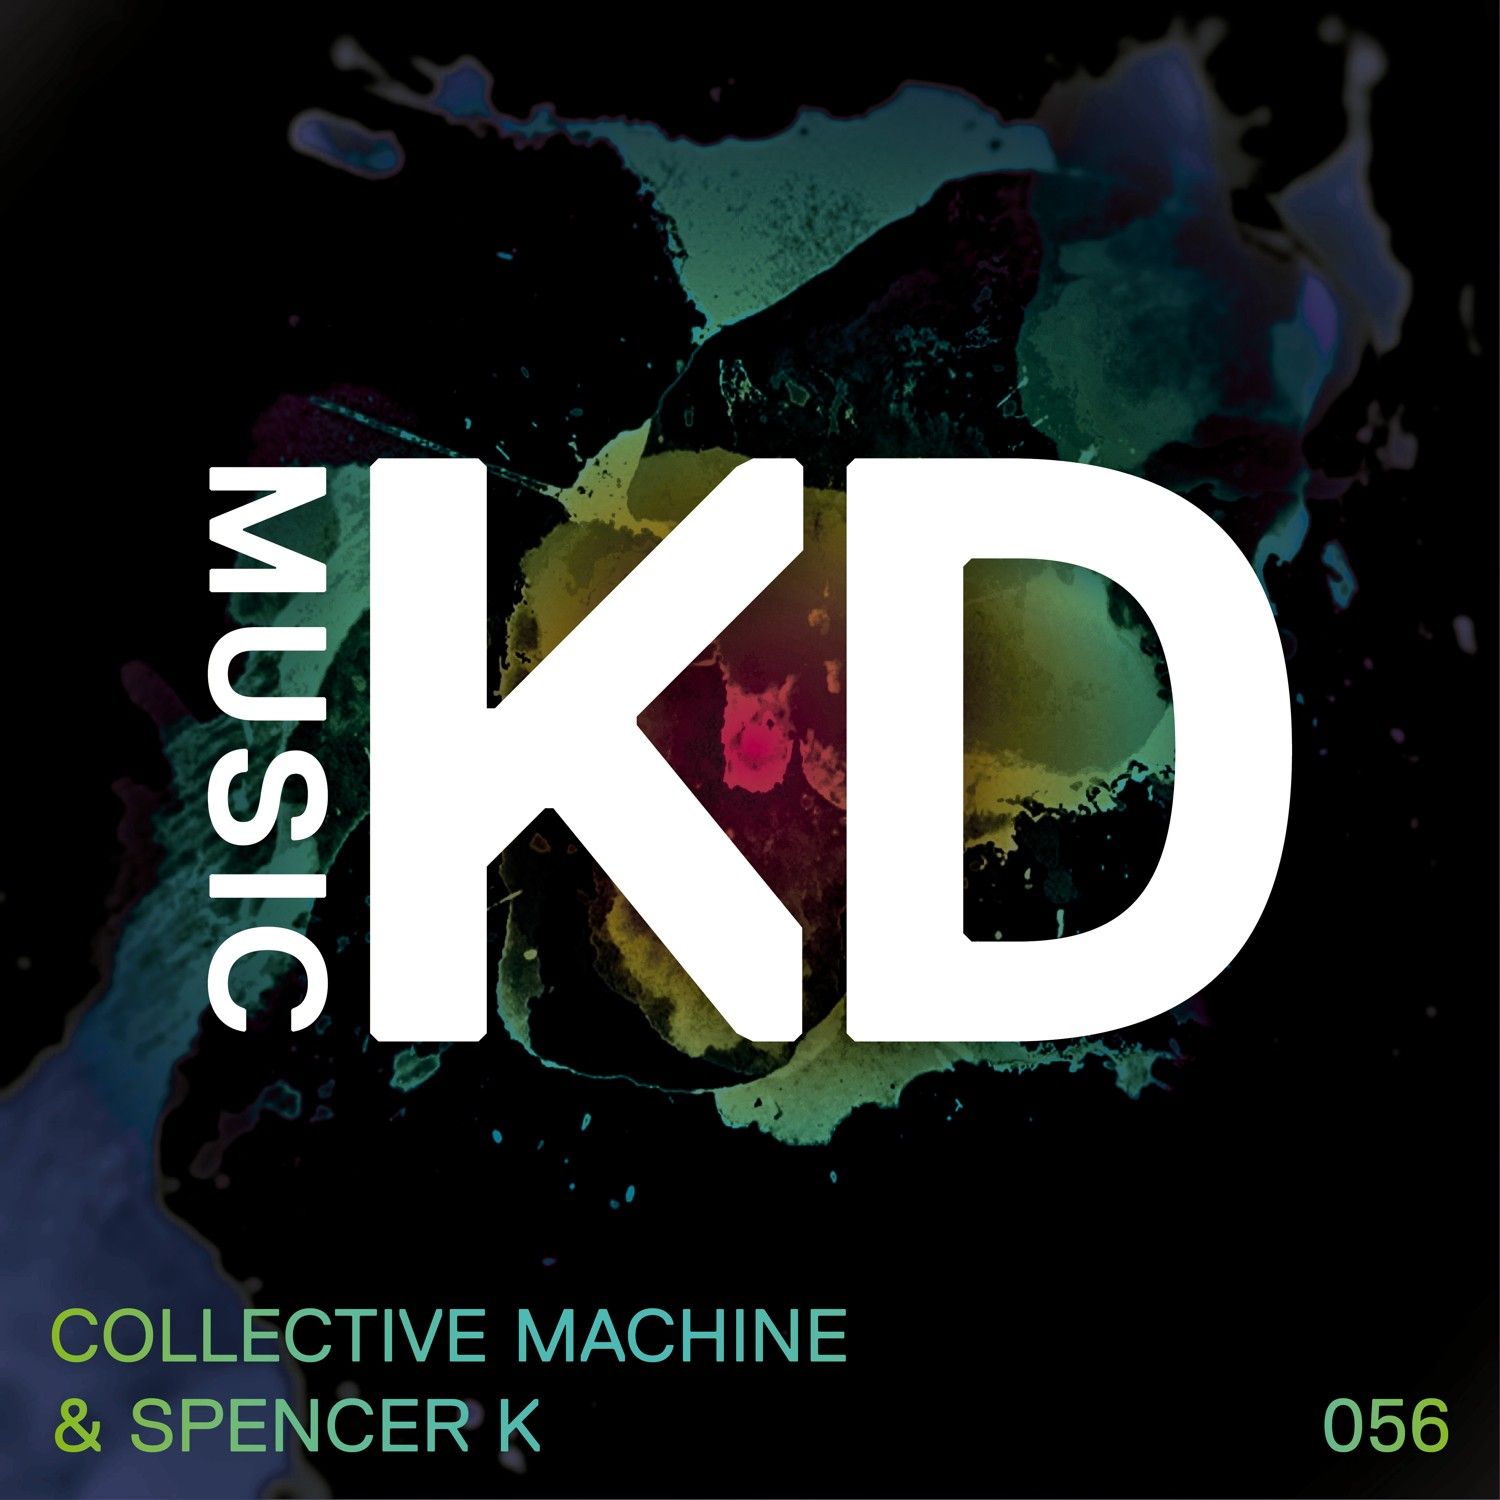 collectivemachinespencerk-physicalismcover.jpg